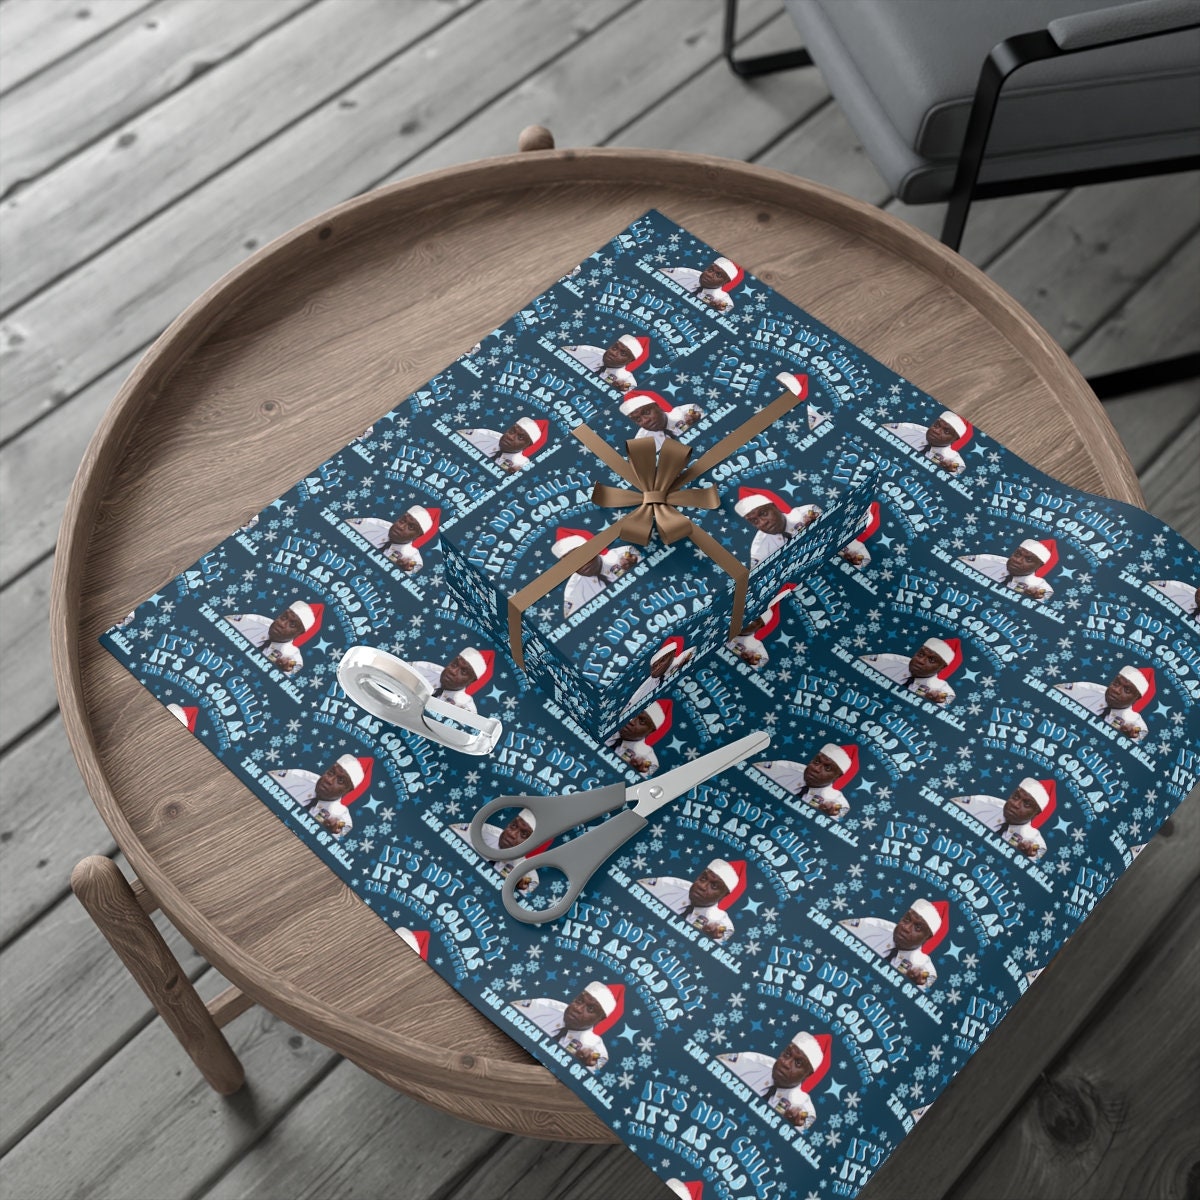 Captain Holt Gift Wrap, Brooklyn Nine Nine Christmas Wrapping Paper